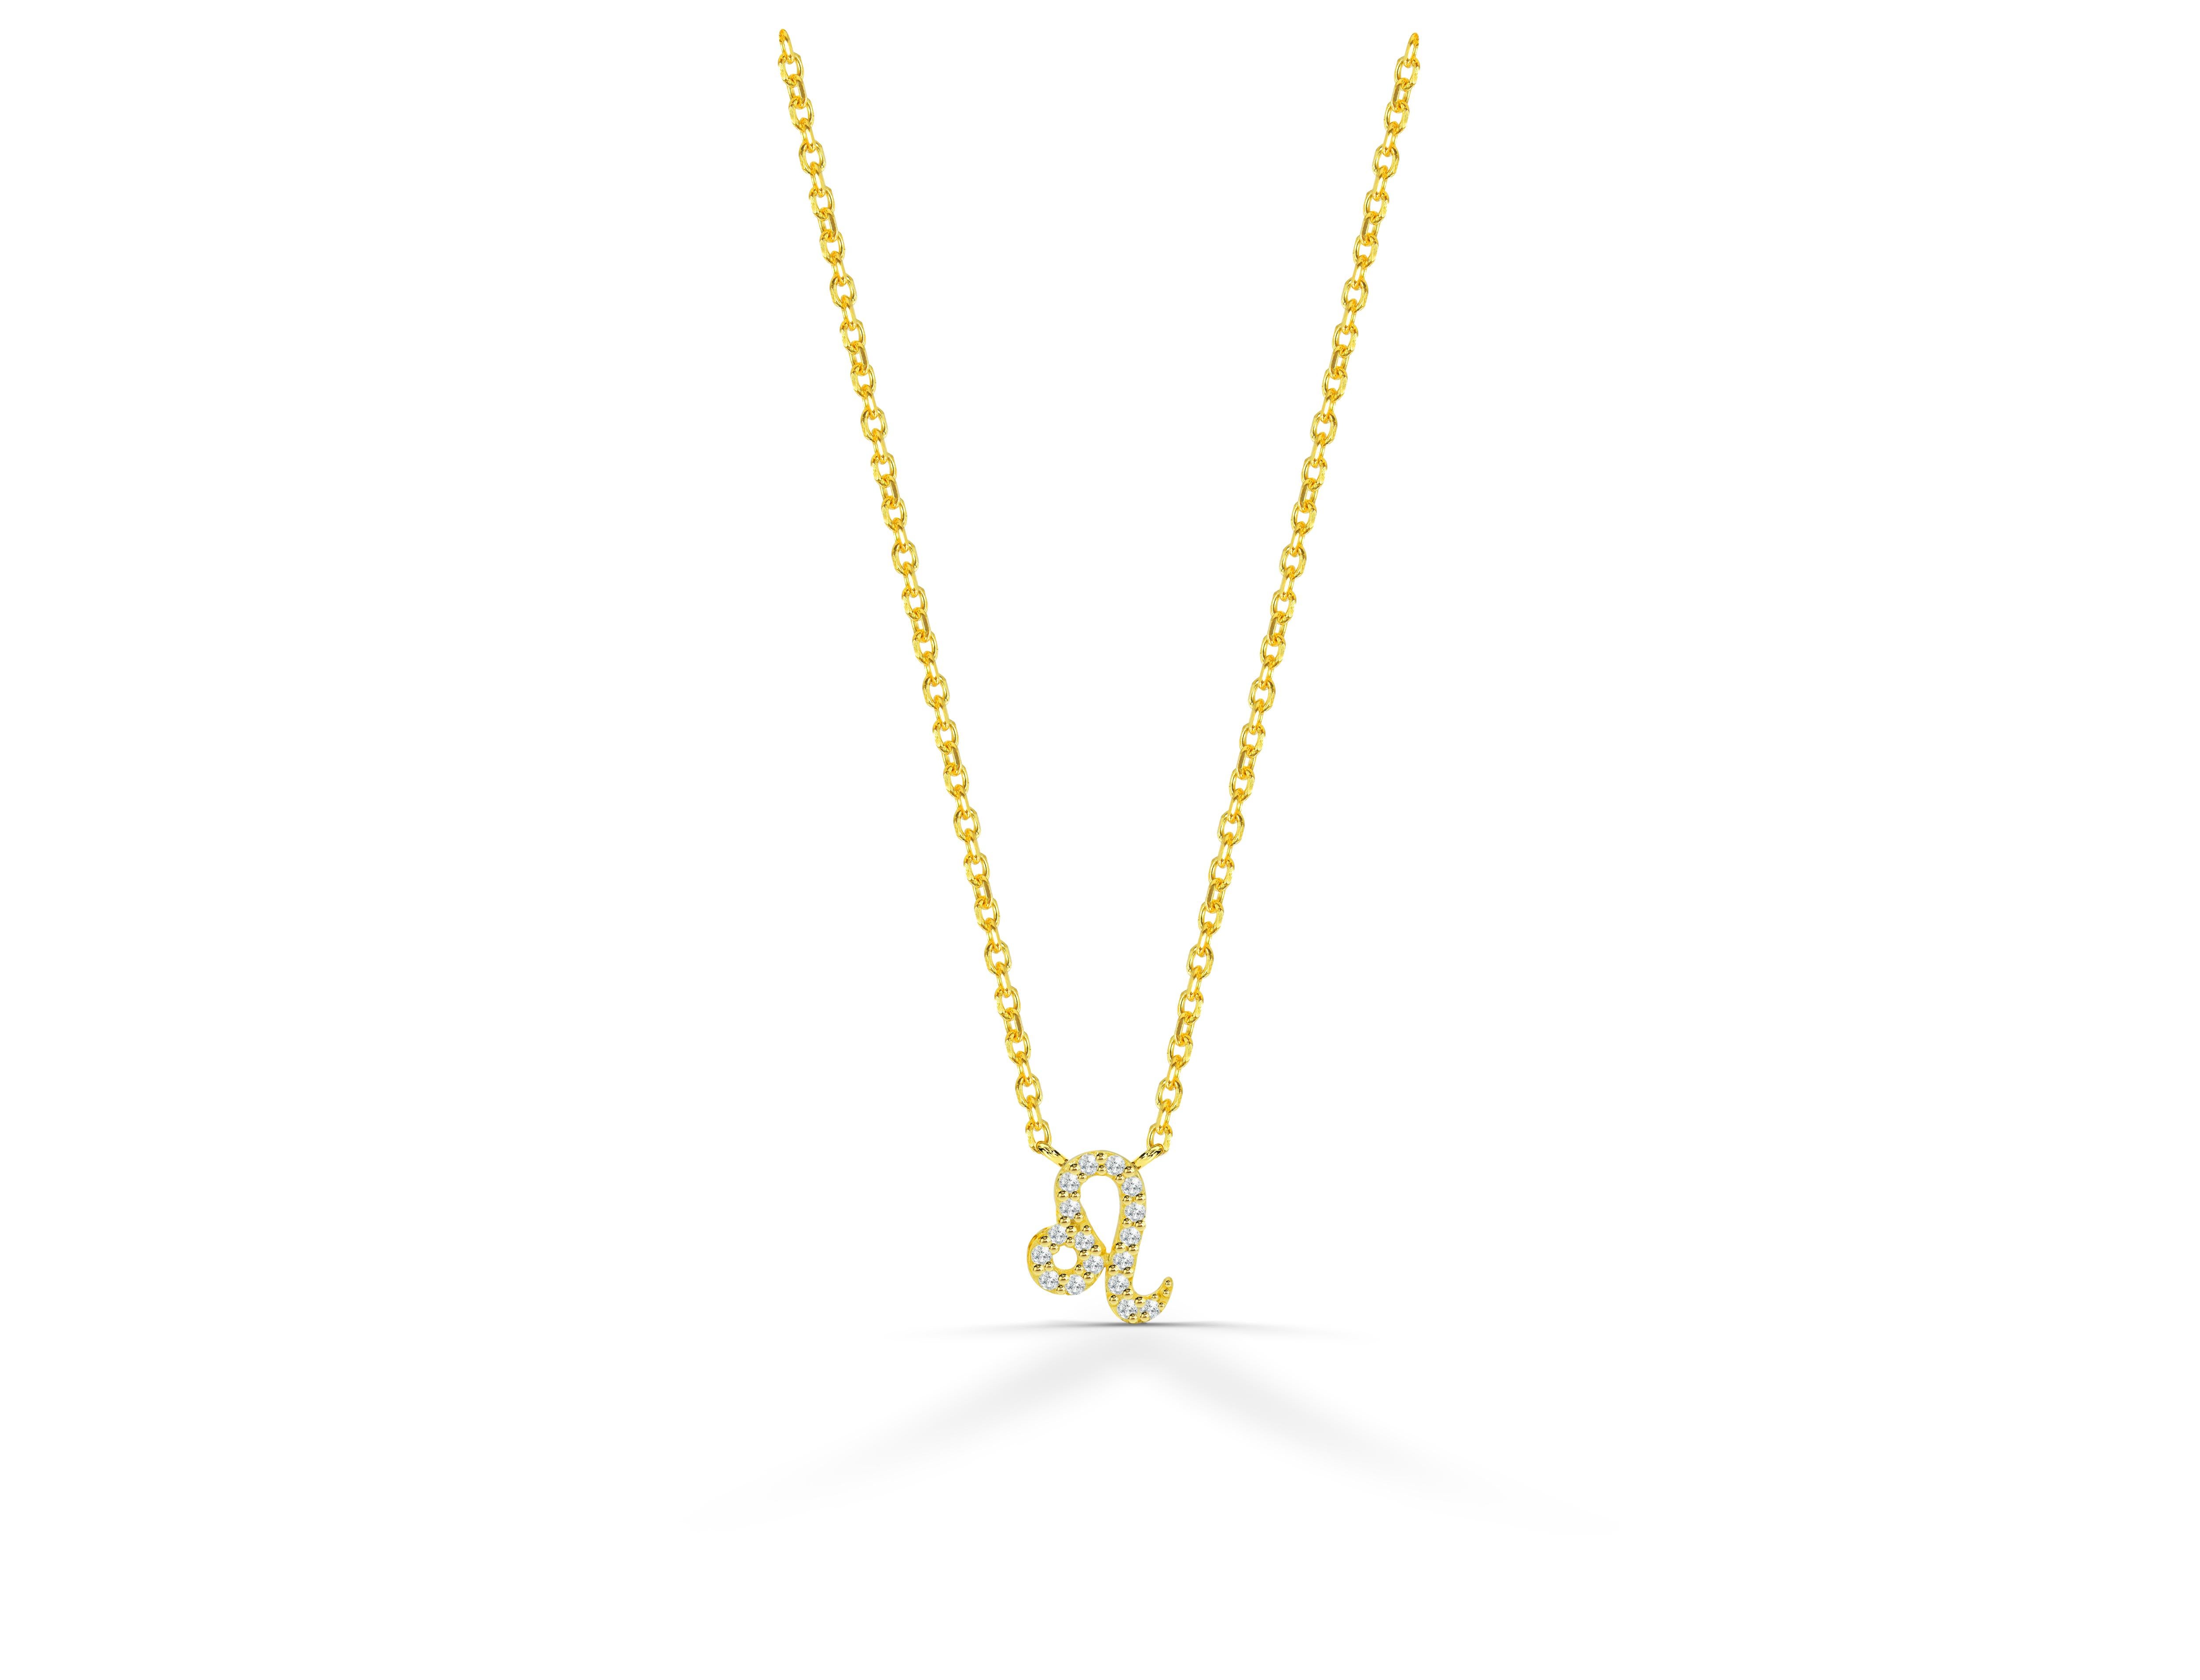 Beautiful and Sparkly Diamond Leo Necklace is made of 14k solid gold.
Available in three colors of gold: White Gold / Rose Gold / Yellow Gold.

Natural genuine round cut diamond each diamond is hand selected by me to ensure quality and set by a